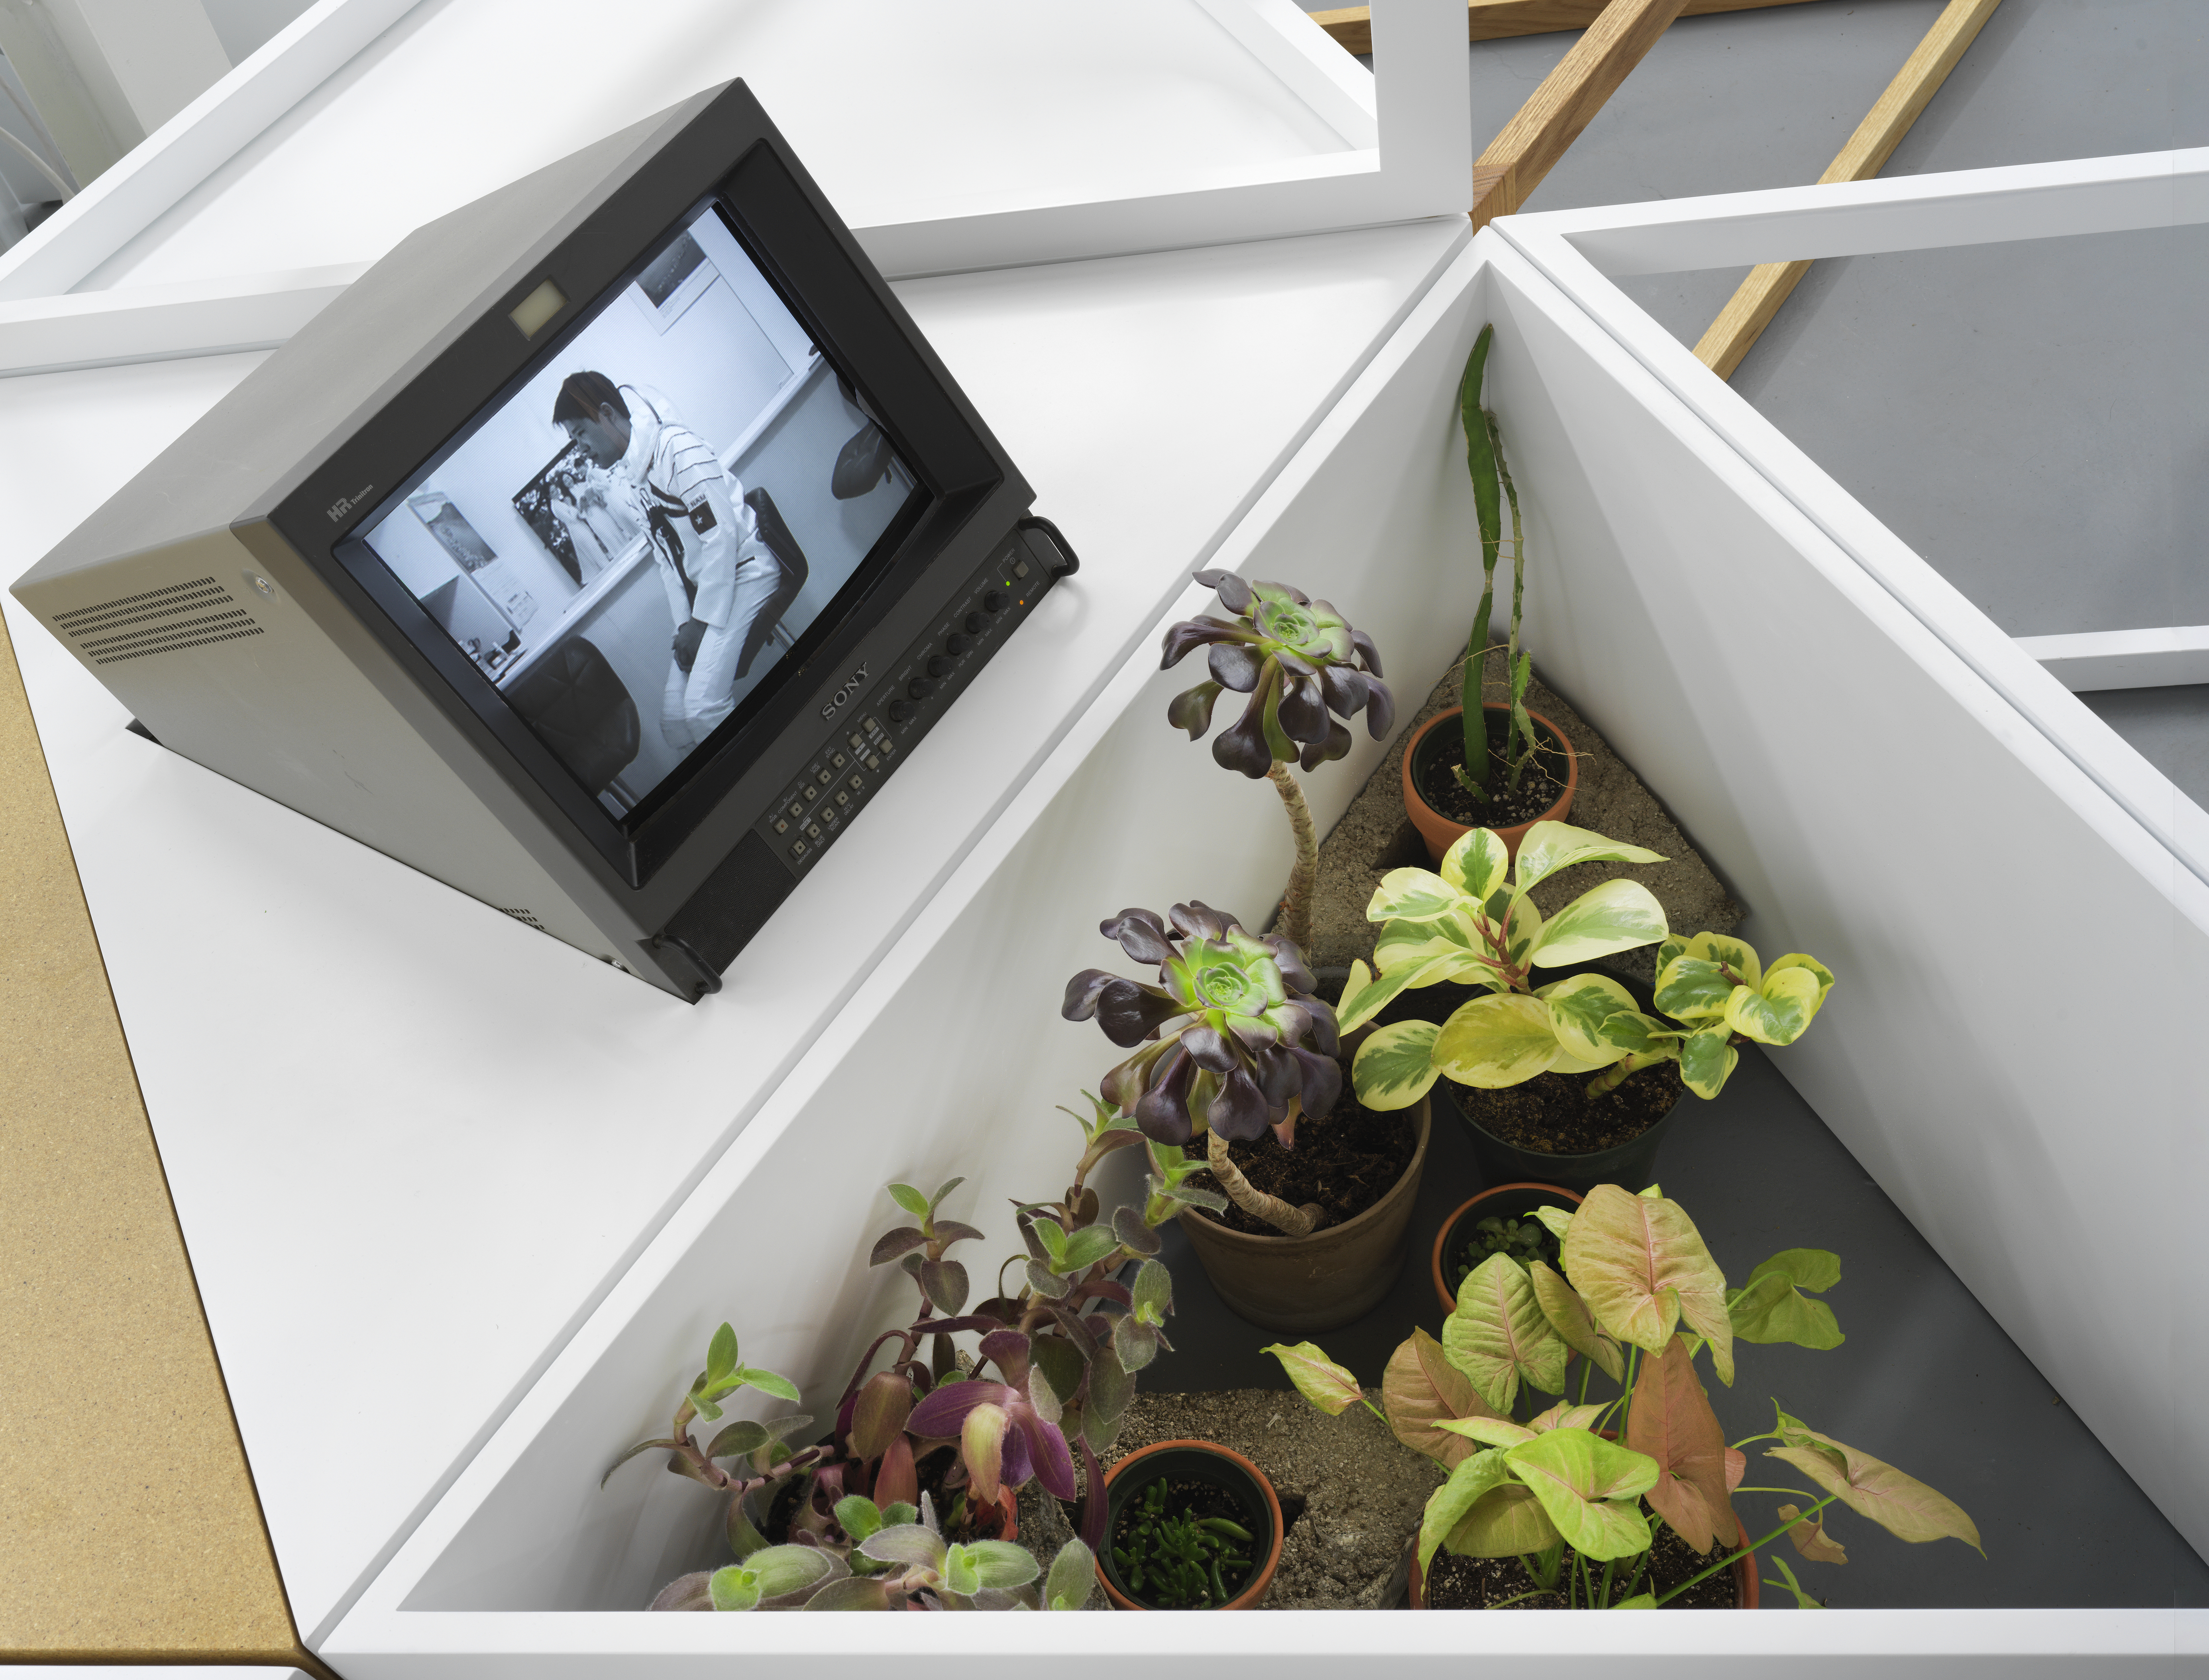 Image: A closeup photo taken from above of the wooden triangle segments holding various potted plants with green, purple, and yellow leaves. A small, grey television is set on top of a neighboring triangle segment. The TV screen is tilted upwards and shows a black and white image of a cosmonaut sitting sideways on a chair in a space suit without a helmet. Image courtesy of the artist.